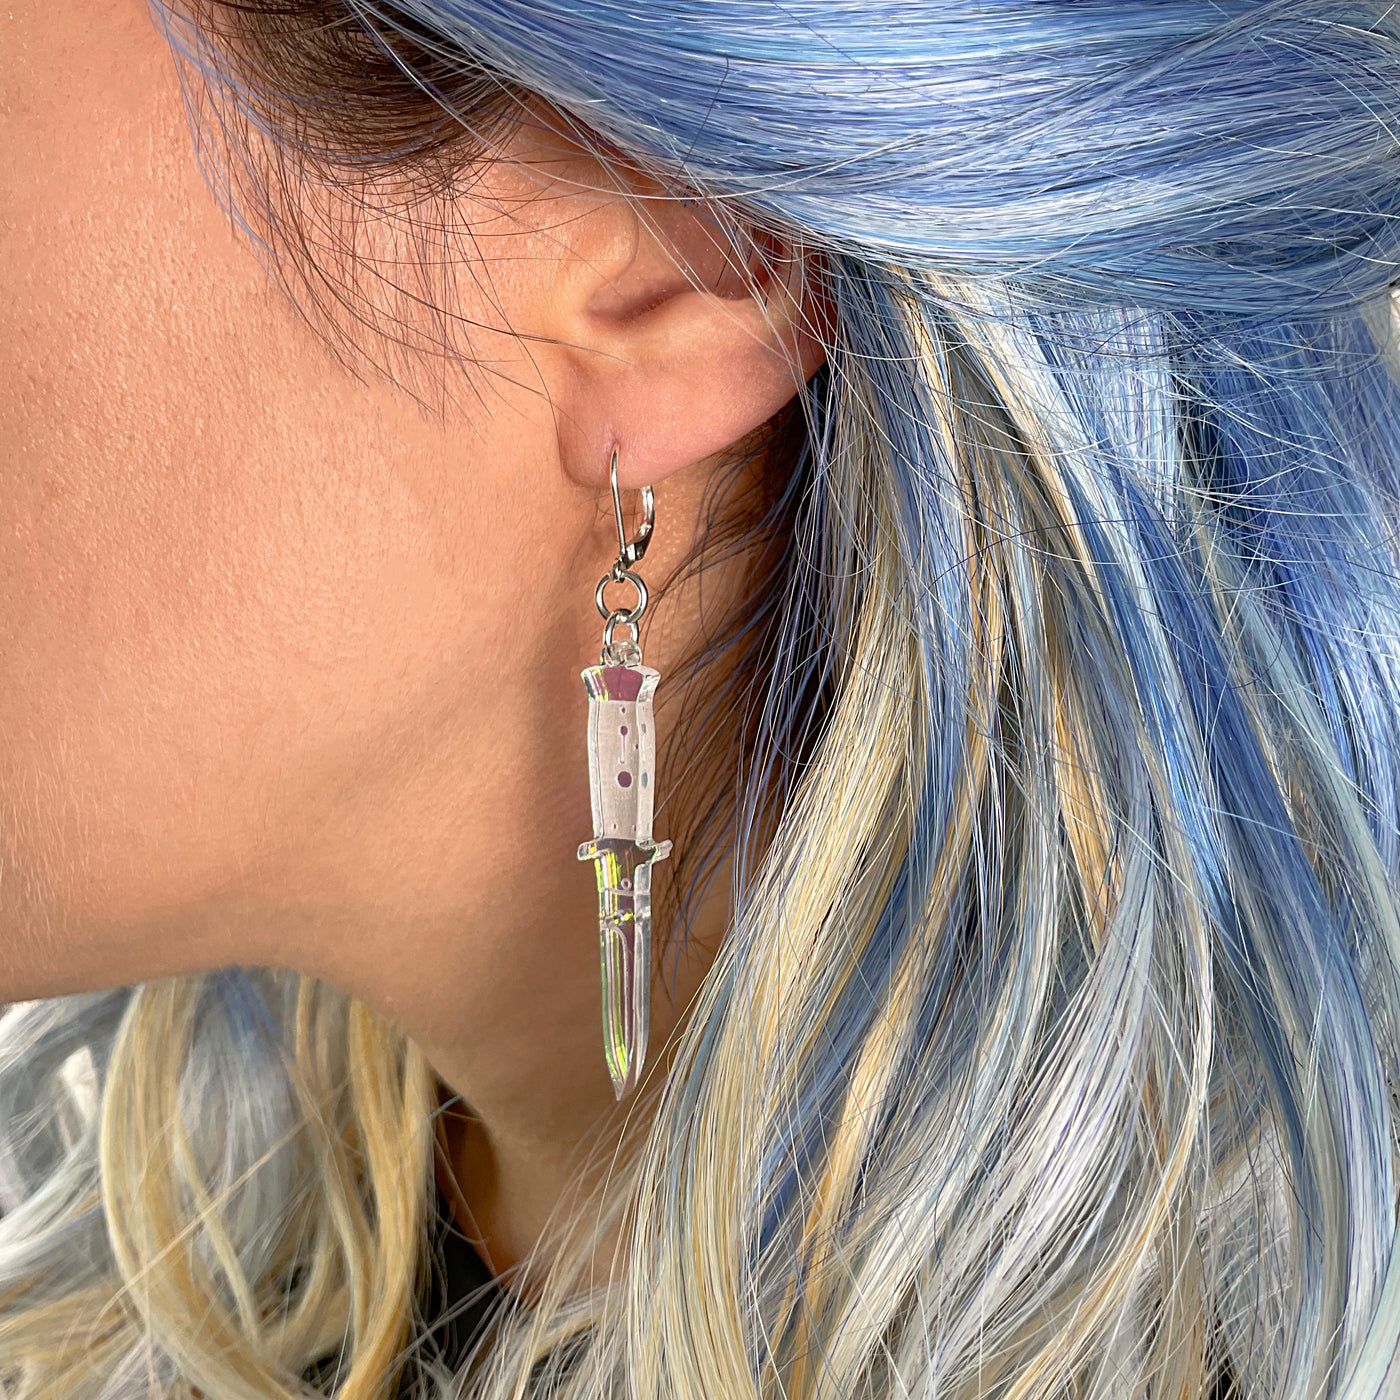 A side profile of a woman's ear wearing the Iridescent switchblade dangle earring.